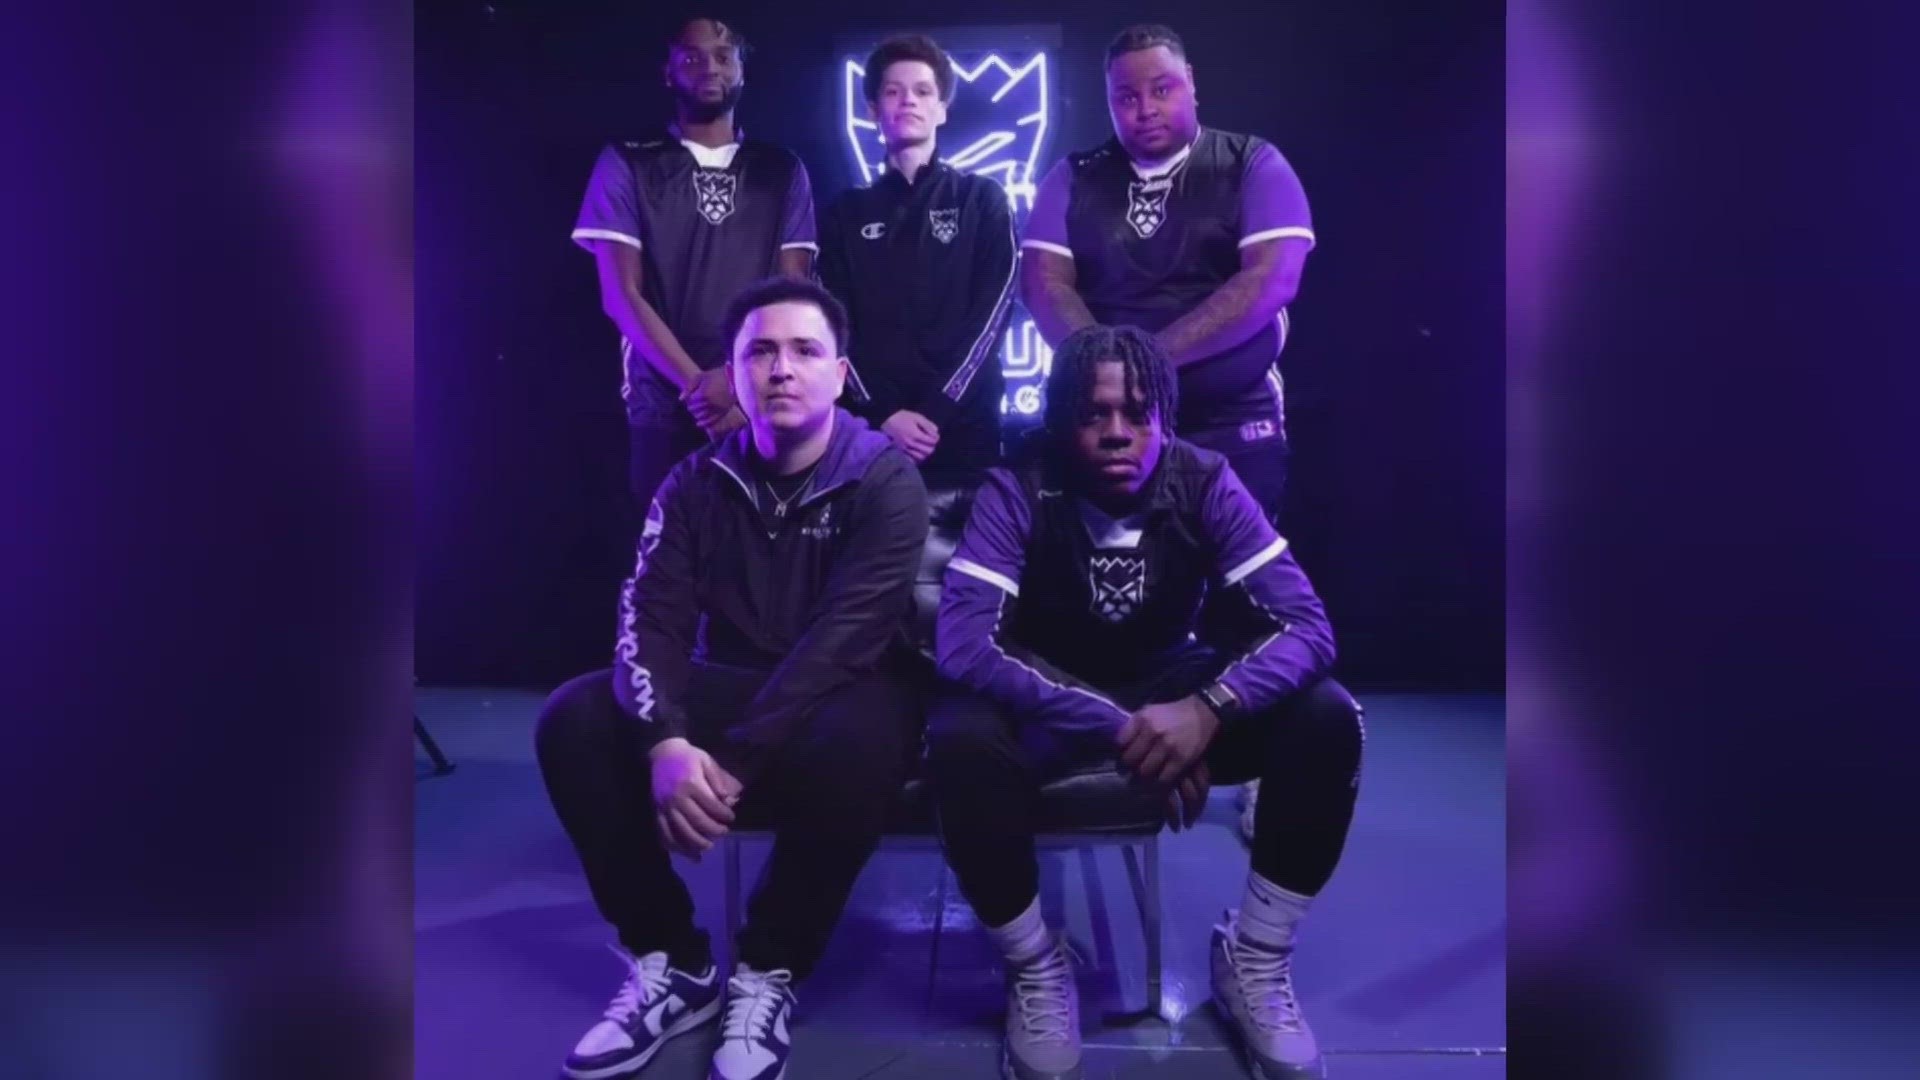 ABC10's Kevin John and Matt George catch up with Kings Guard Gaming of the NBA 2K League.